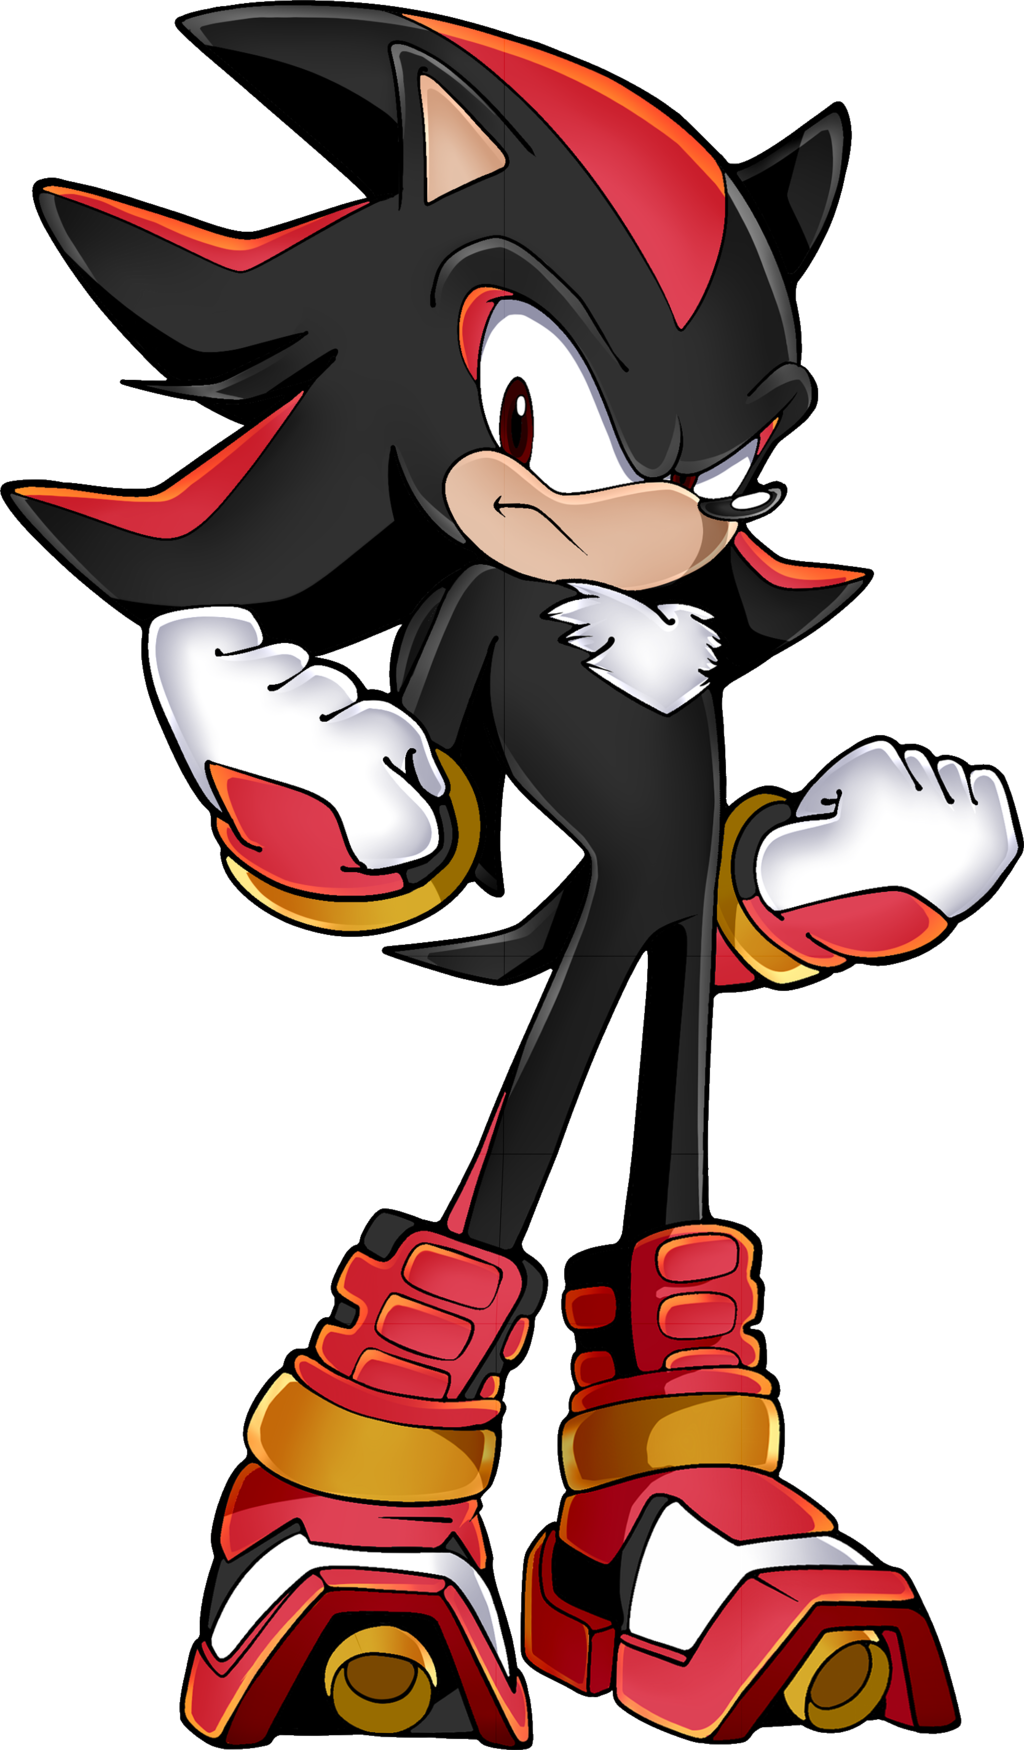 Sonic Art Supernatural Shadow Creature The Hedgehog PNG Image